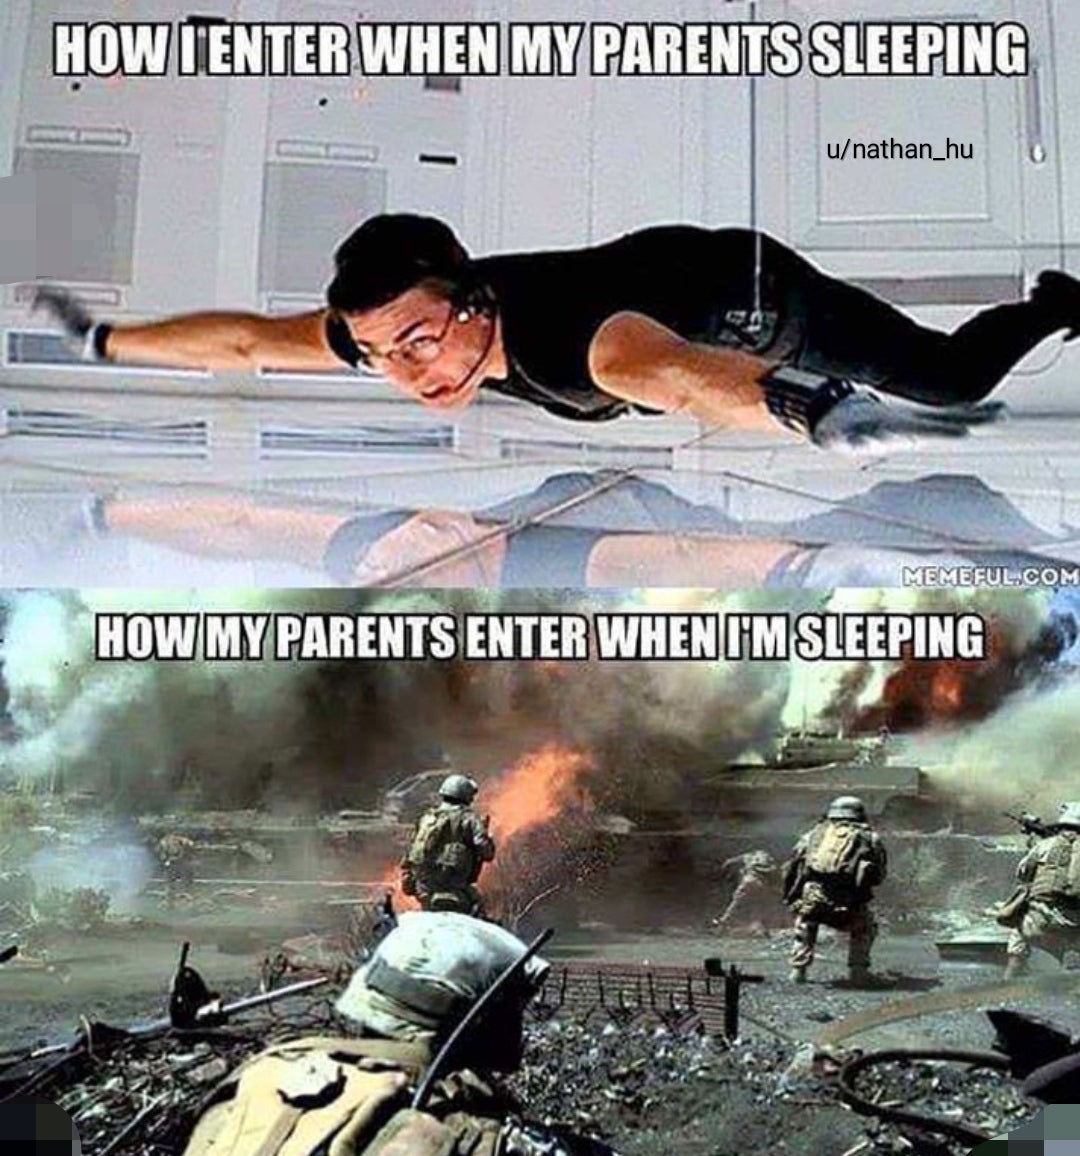 enter when my parents are sleeping - How I'Enter When My Parents Sleeping unathan_hu Memeful.Com How My Parents Enter When I'M Sleeping